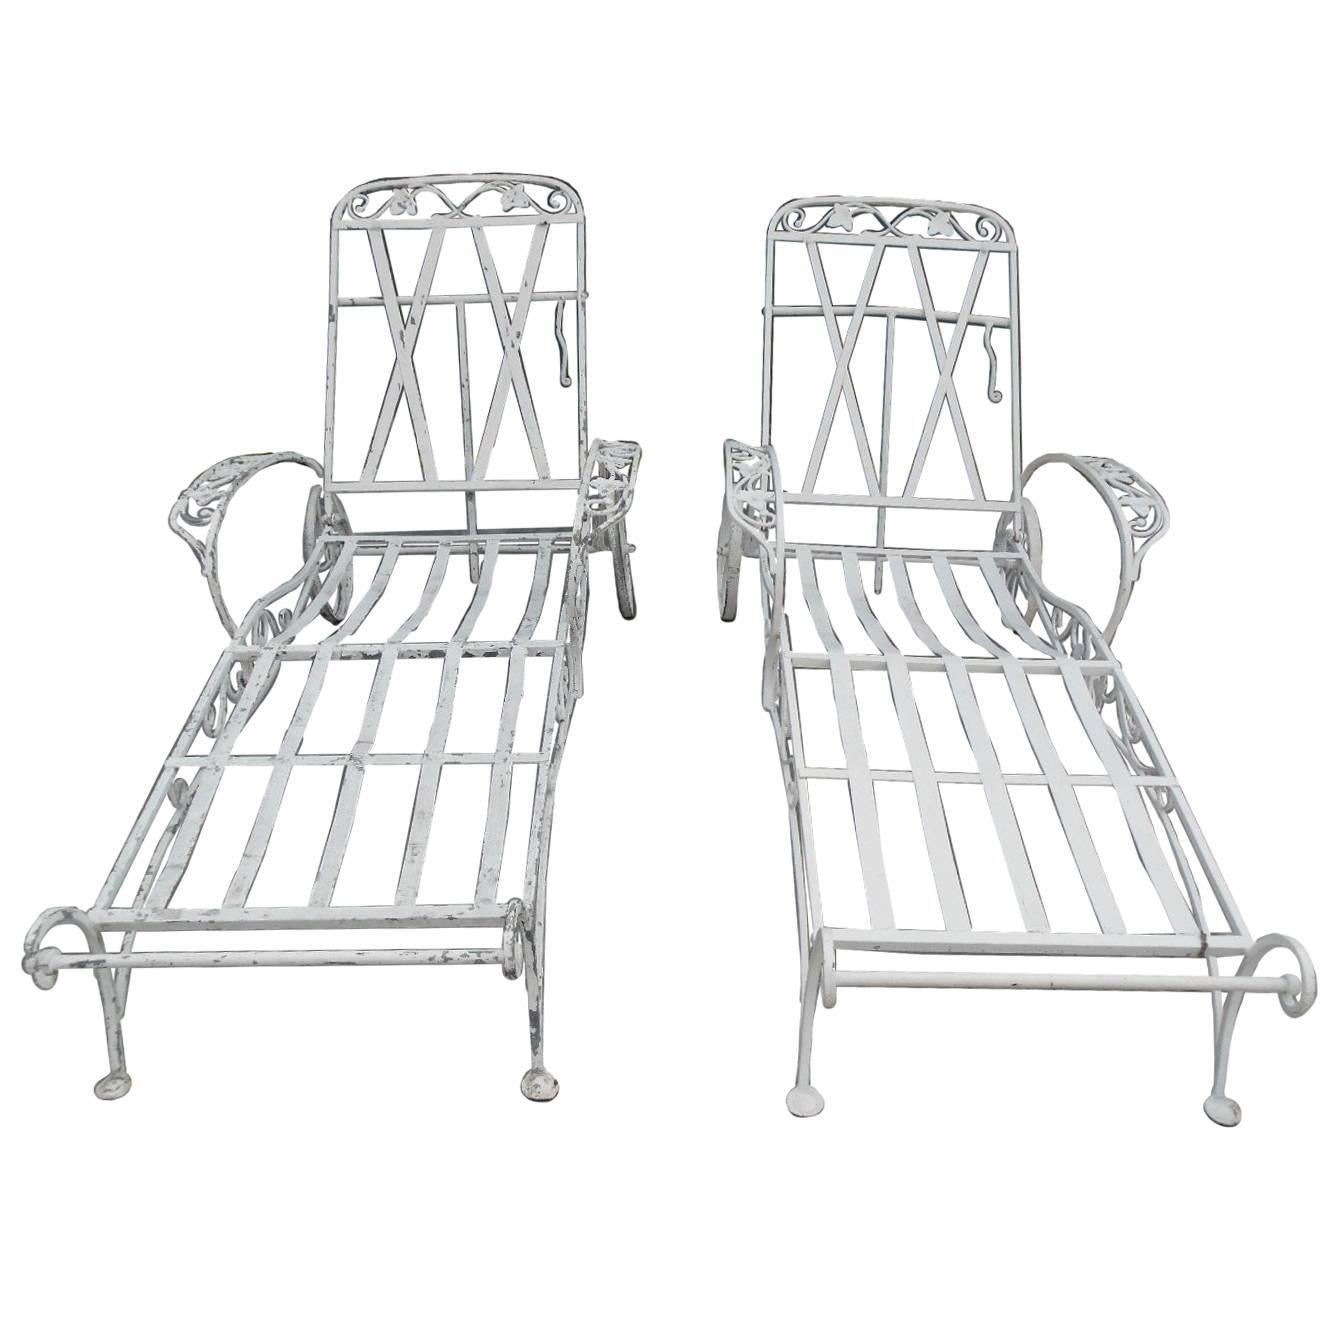 Salterini Chaise Lounges, Mt Vernon Pattern in Wrought Iron (4) available For Sale